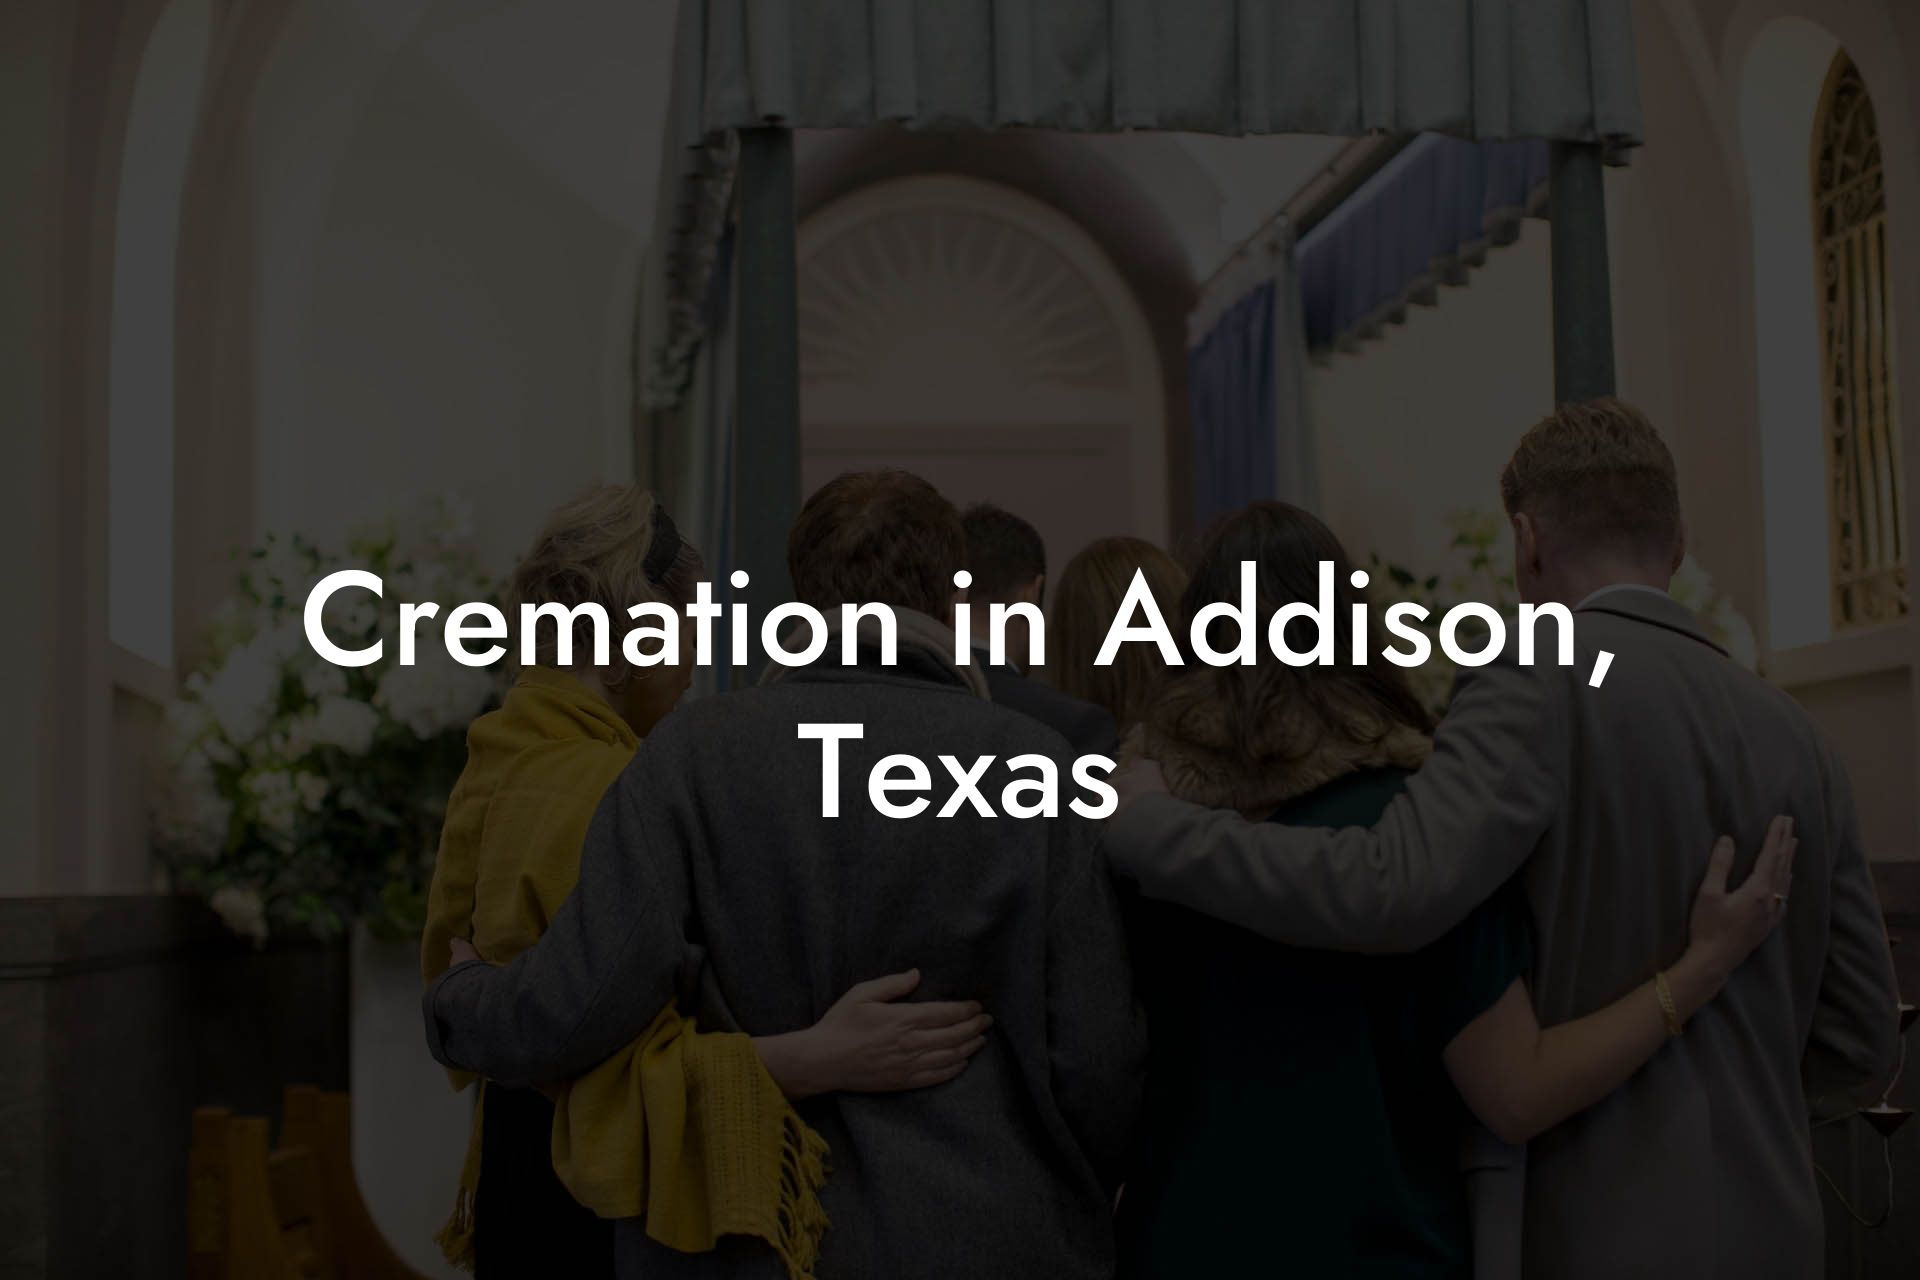 Cremation in Addison, Texas